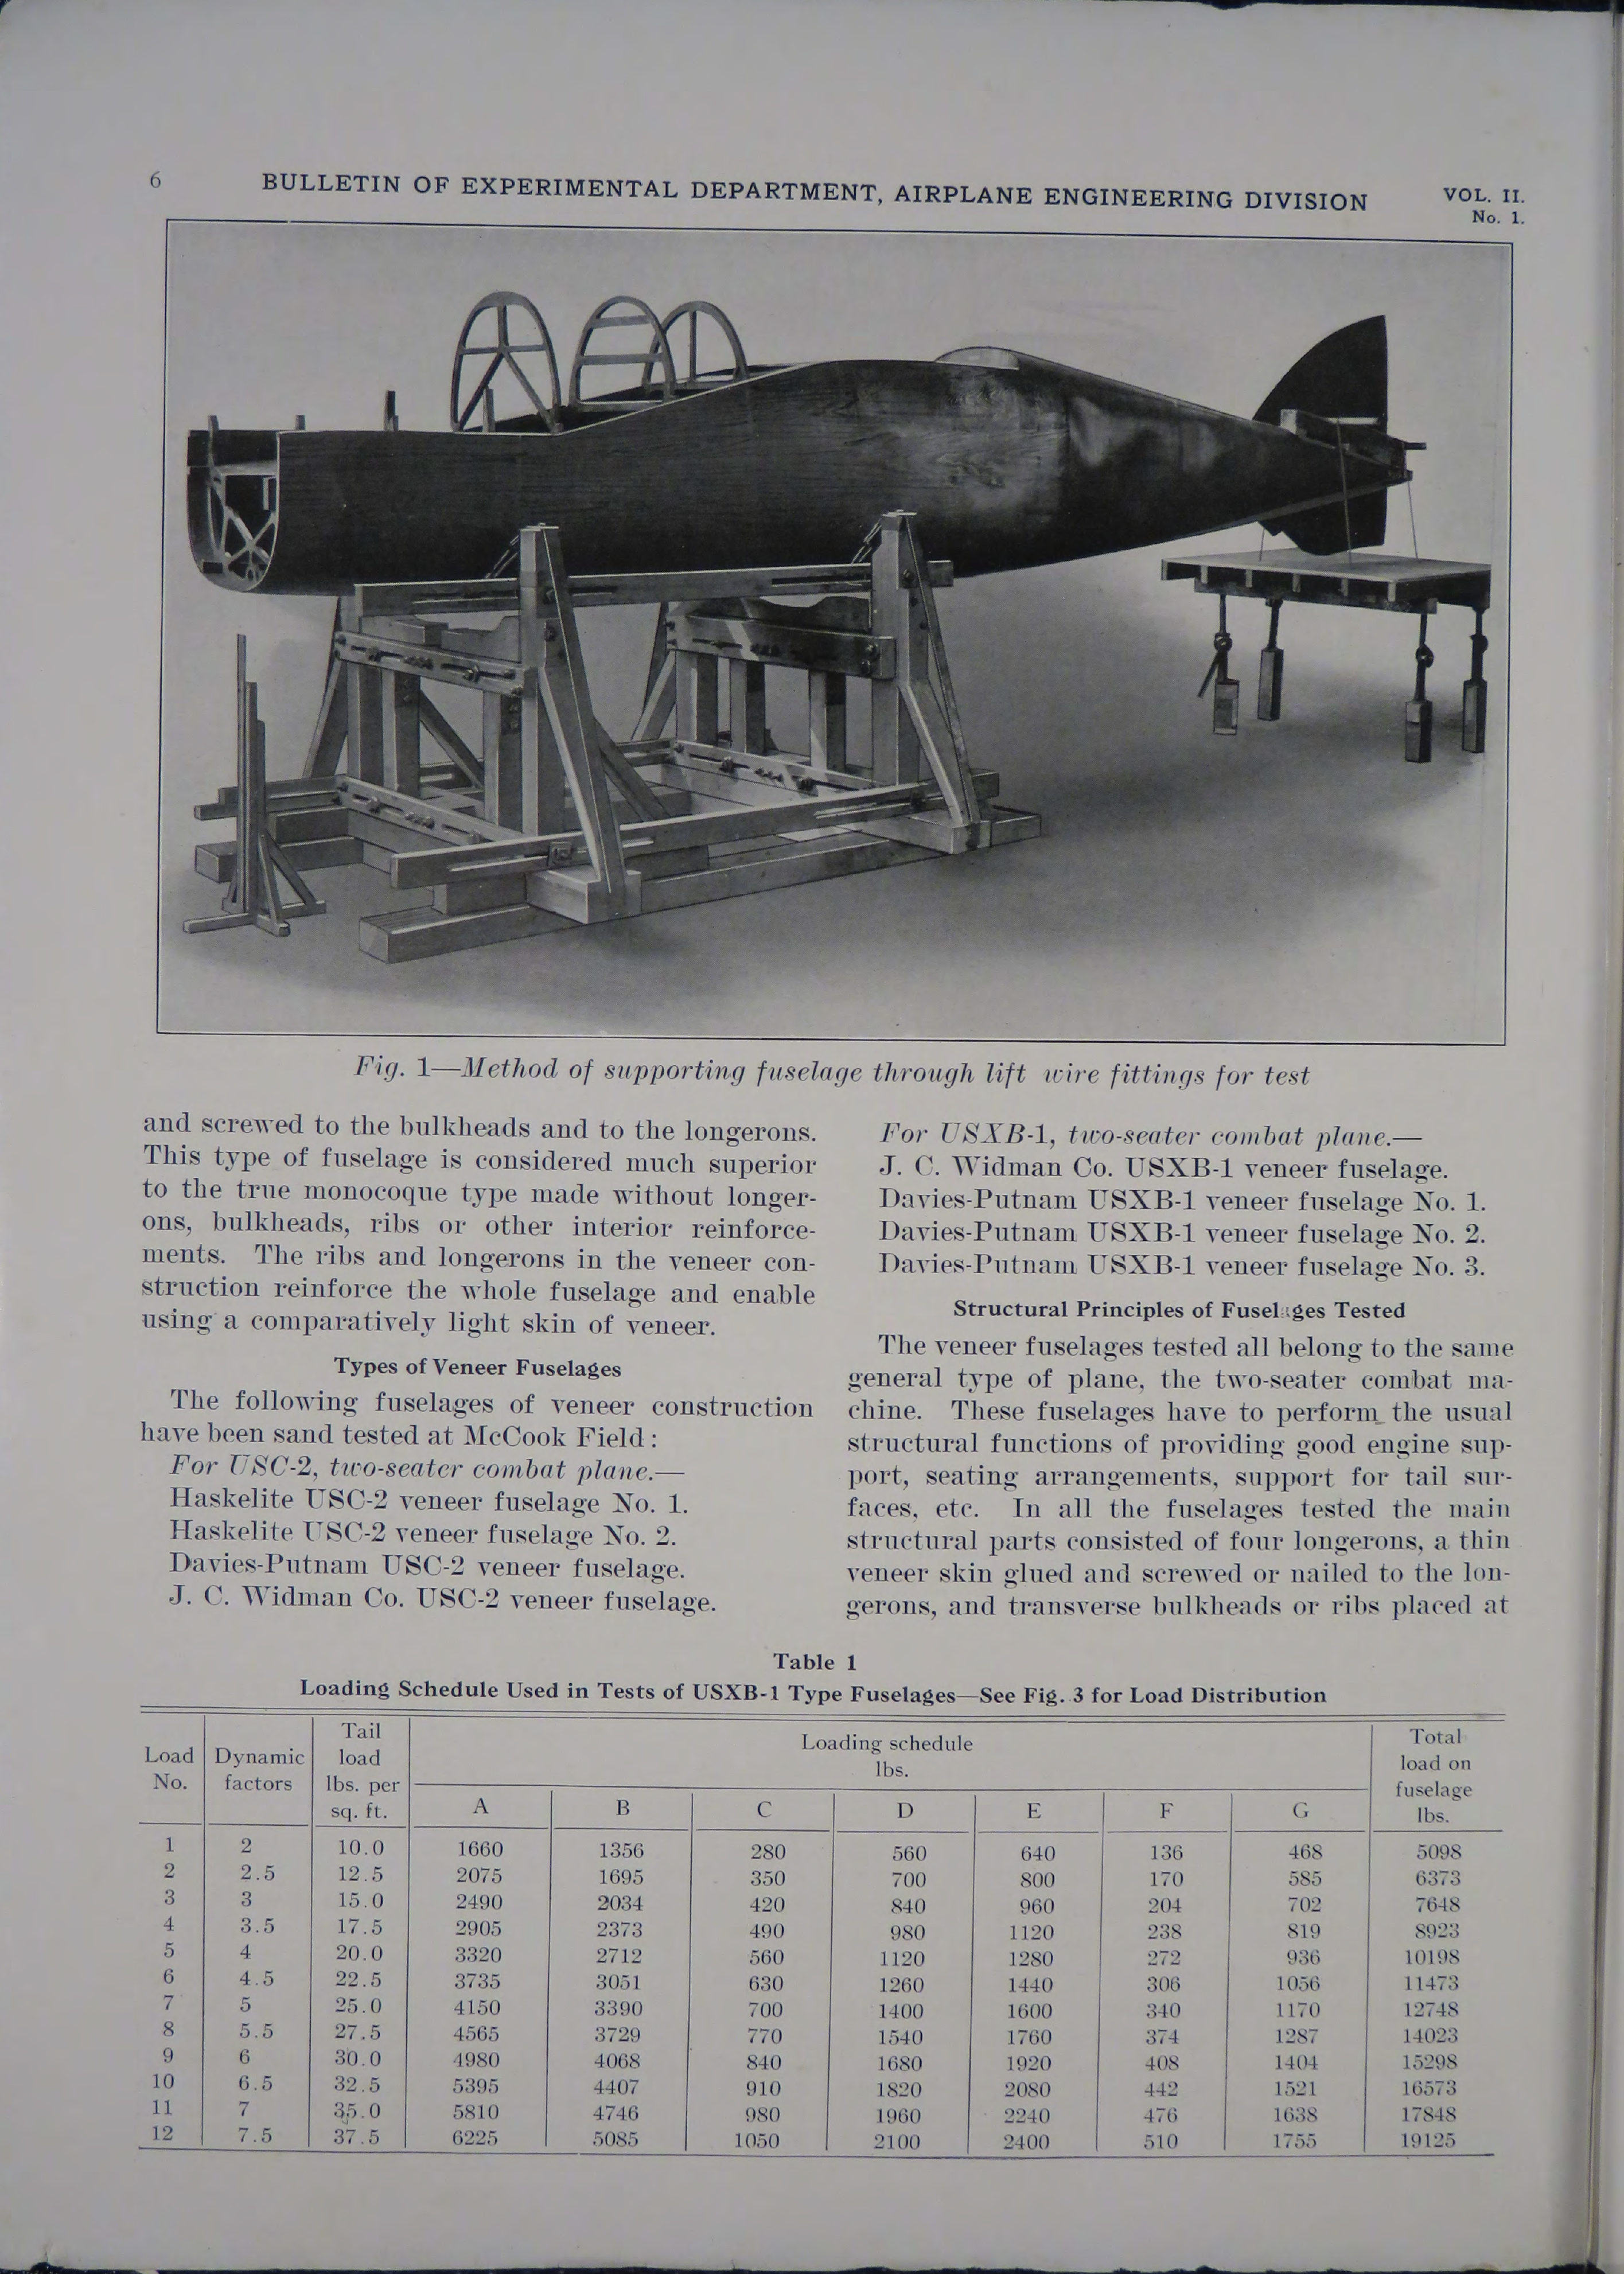 Sample page 6 from AirCorps Library document: Bulletin on the Experimental Department of Airplane Engineering Division